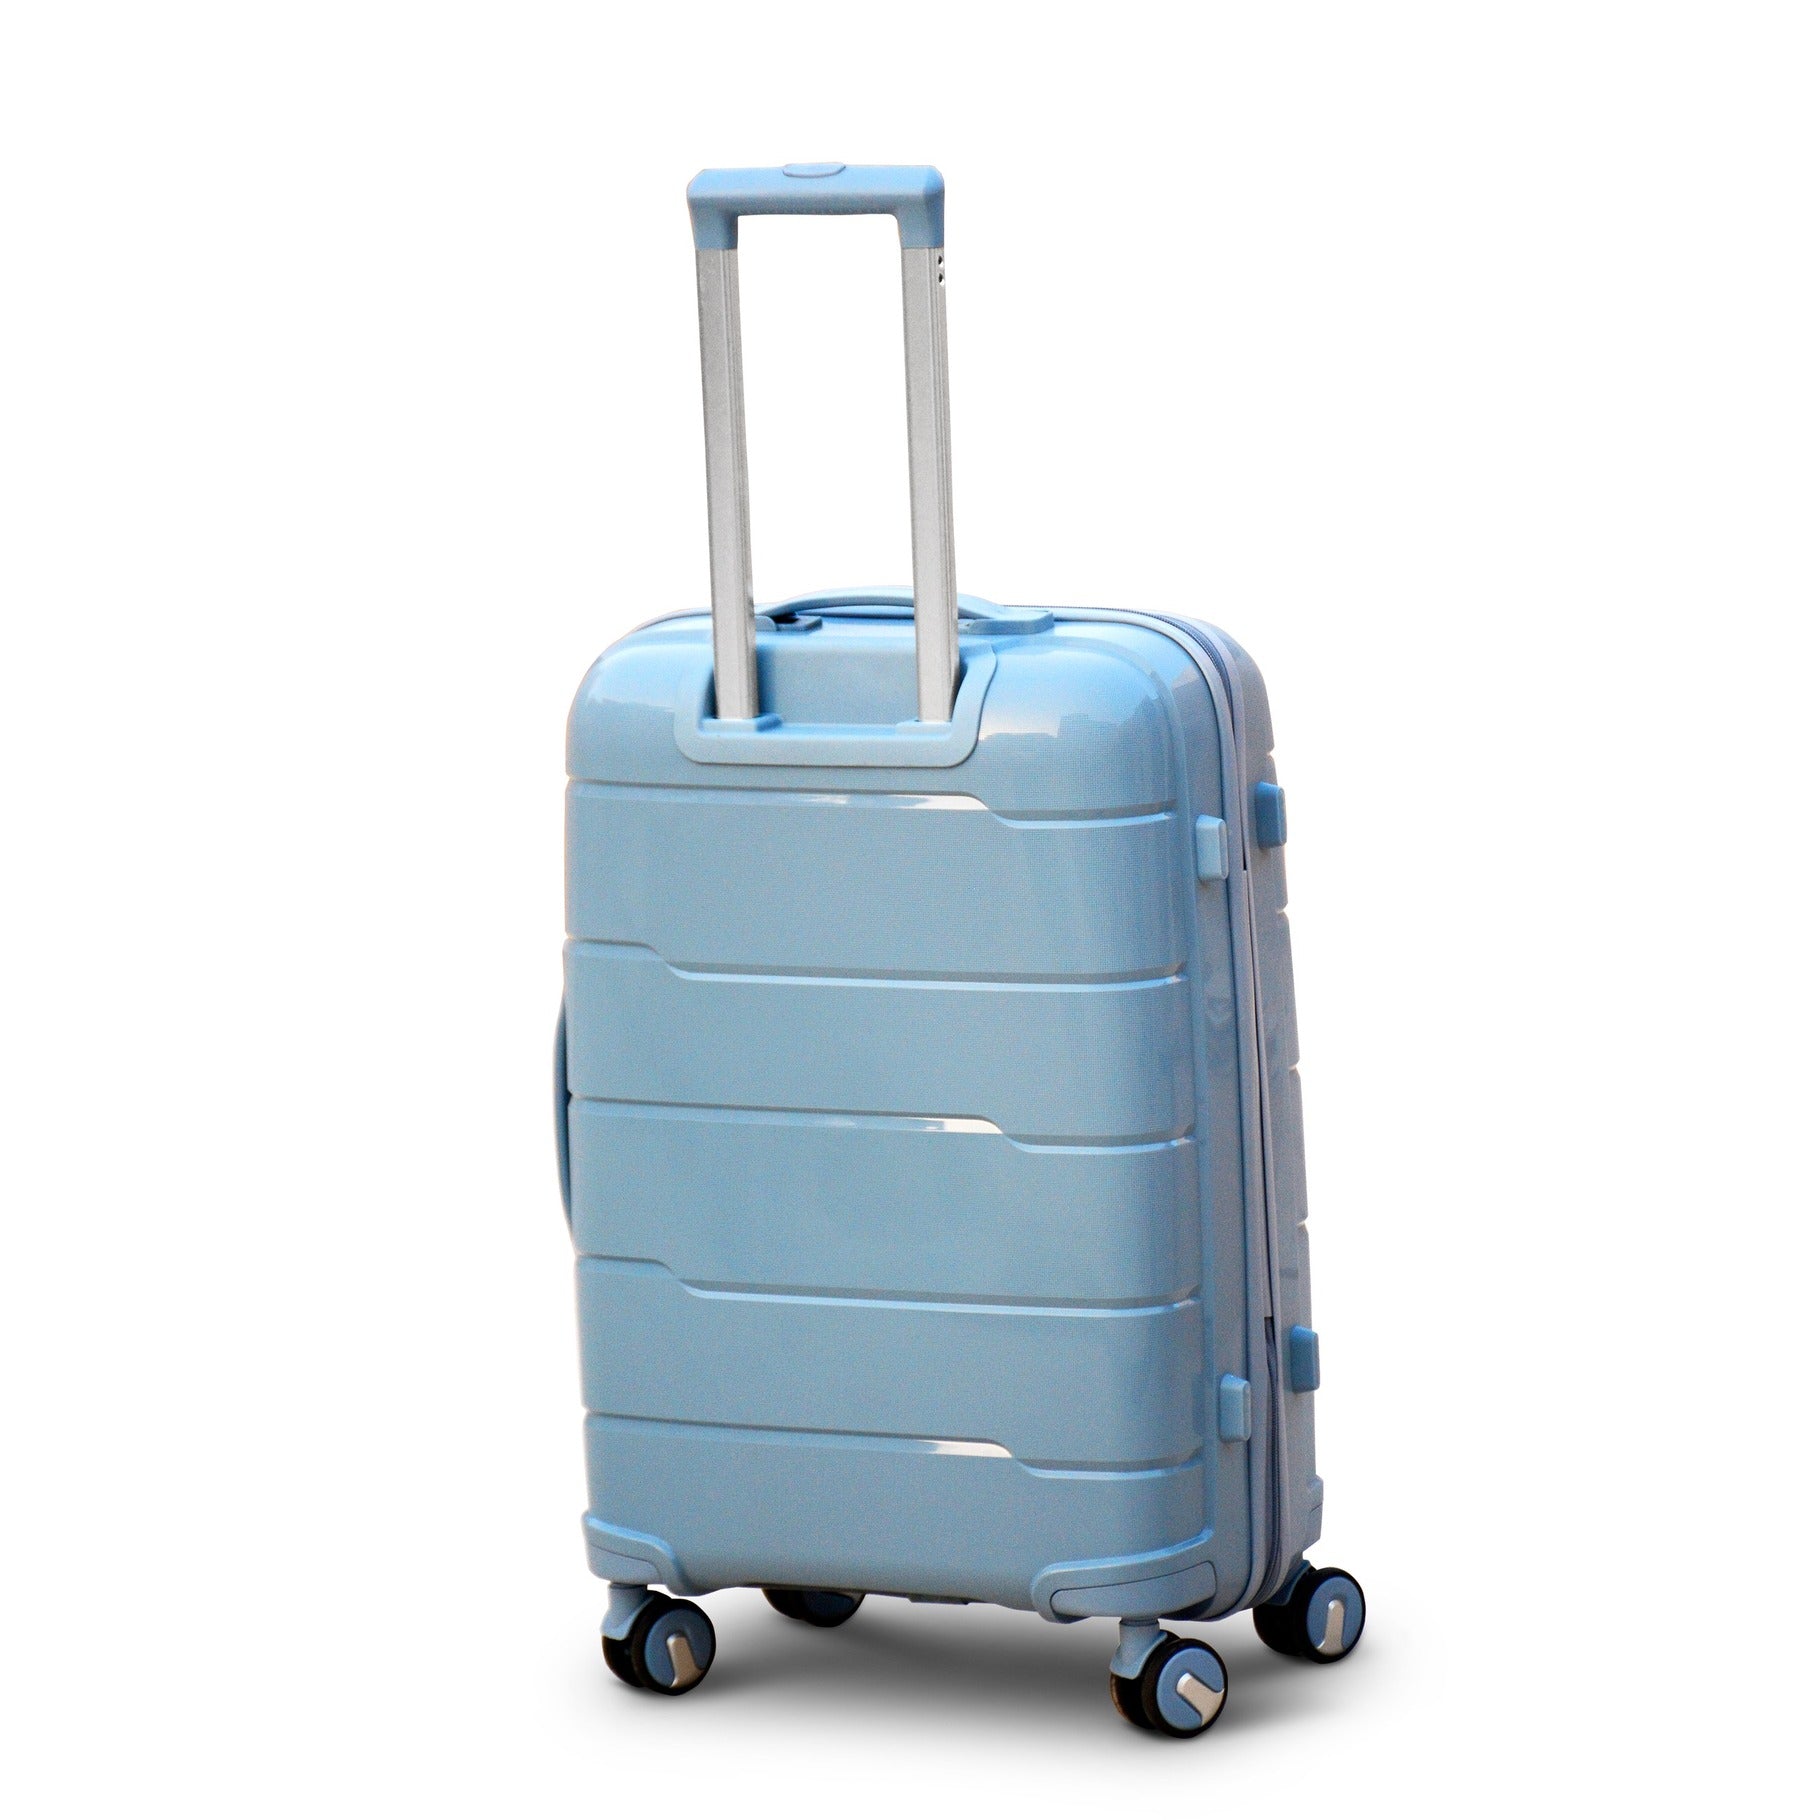 24" Grey Colour Ceramic Smooth PP Lightweight Luggage Bag with Double Spinner Wheel